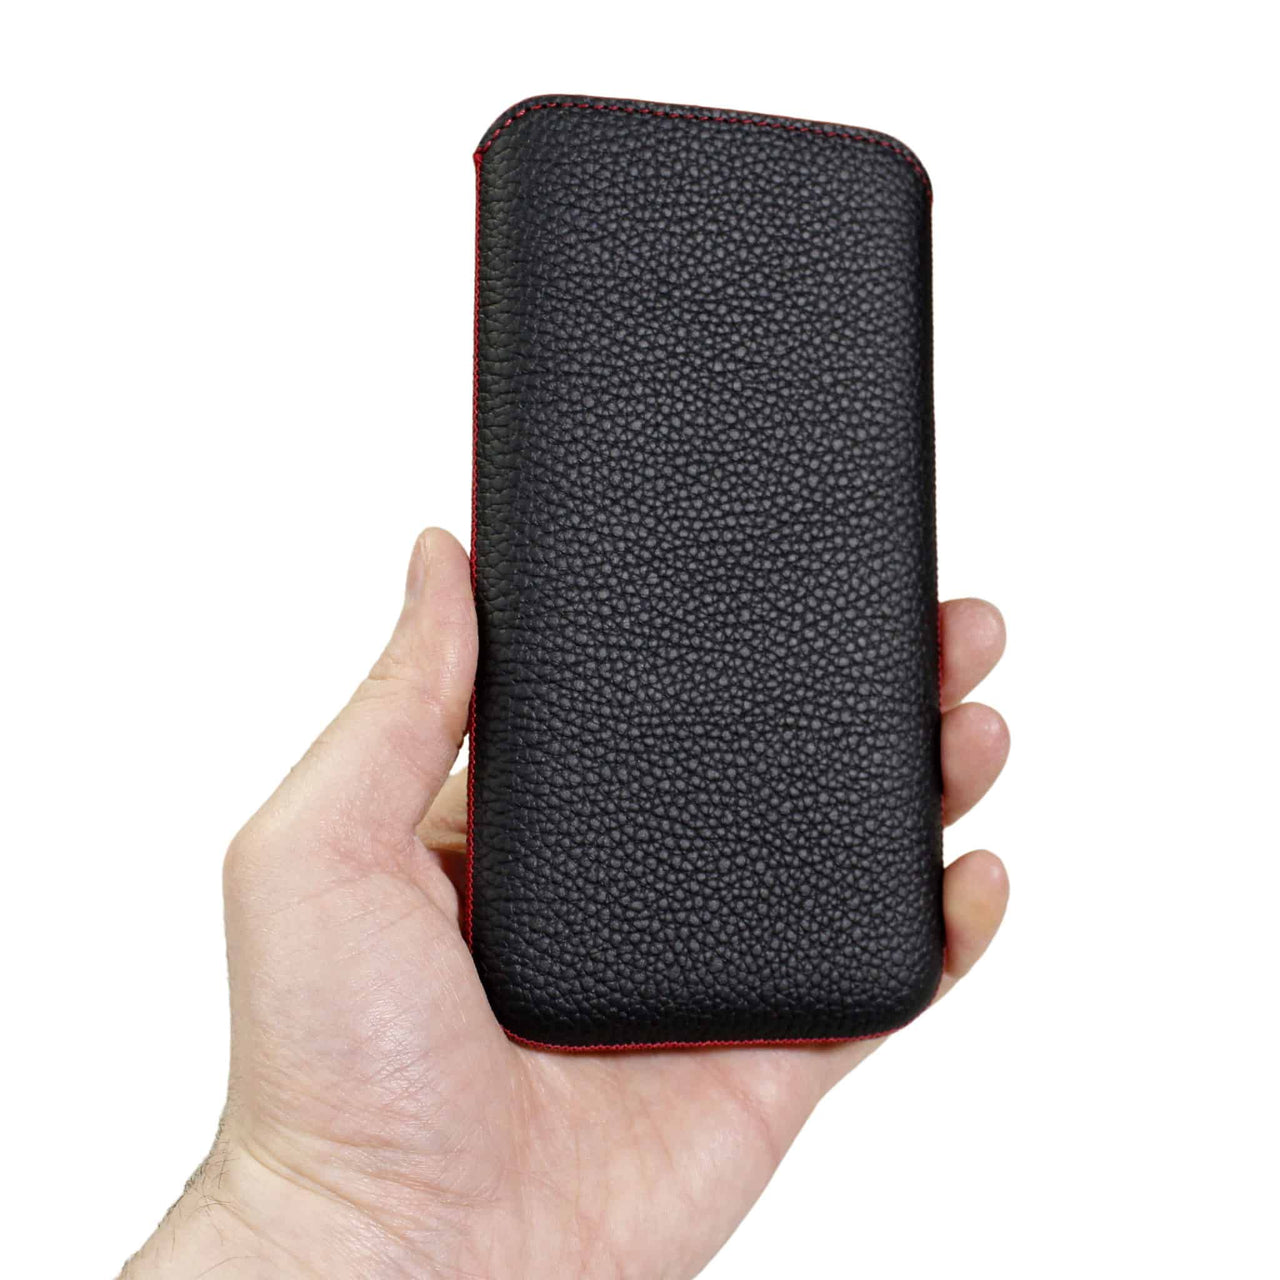 iPhone 13 Pro Max Genuine Leather Pouch Sleeve Case | Artisanpouch